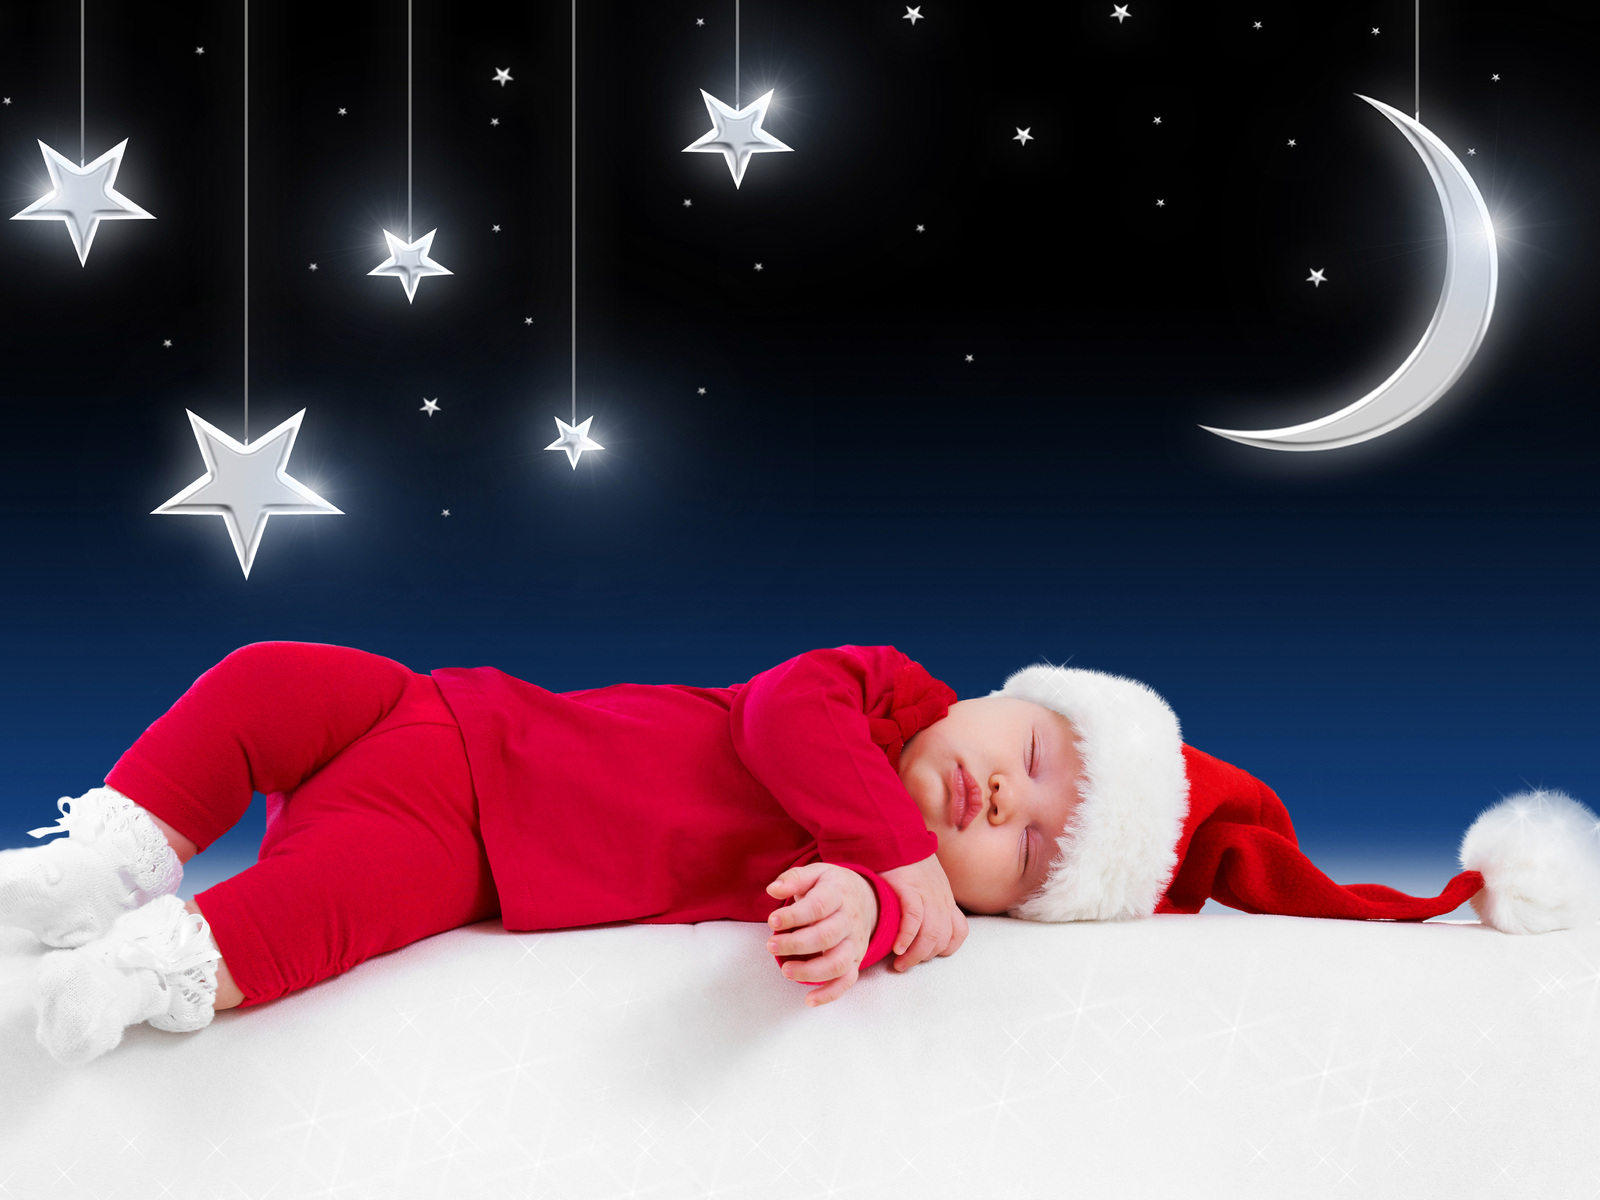 Little Santa Claus, Clothes, Merry Christmas, New Year, - Moon And Star Baby Sleeping - HD Wallpaper 